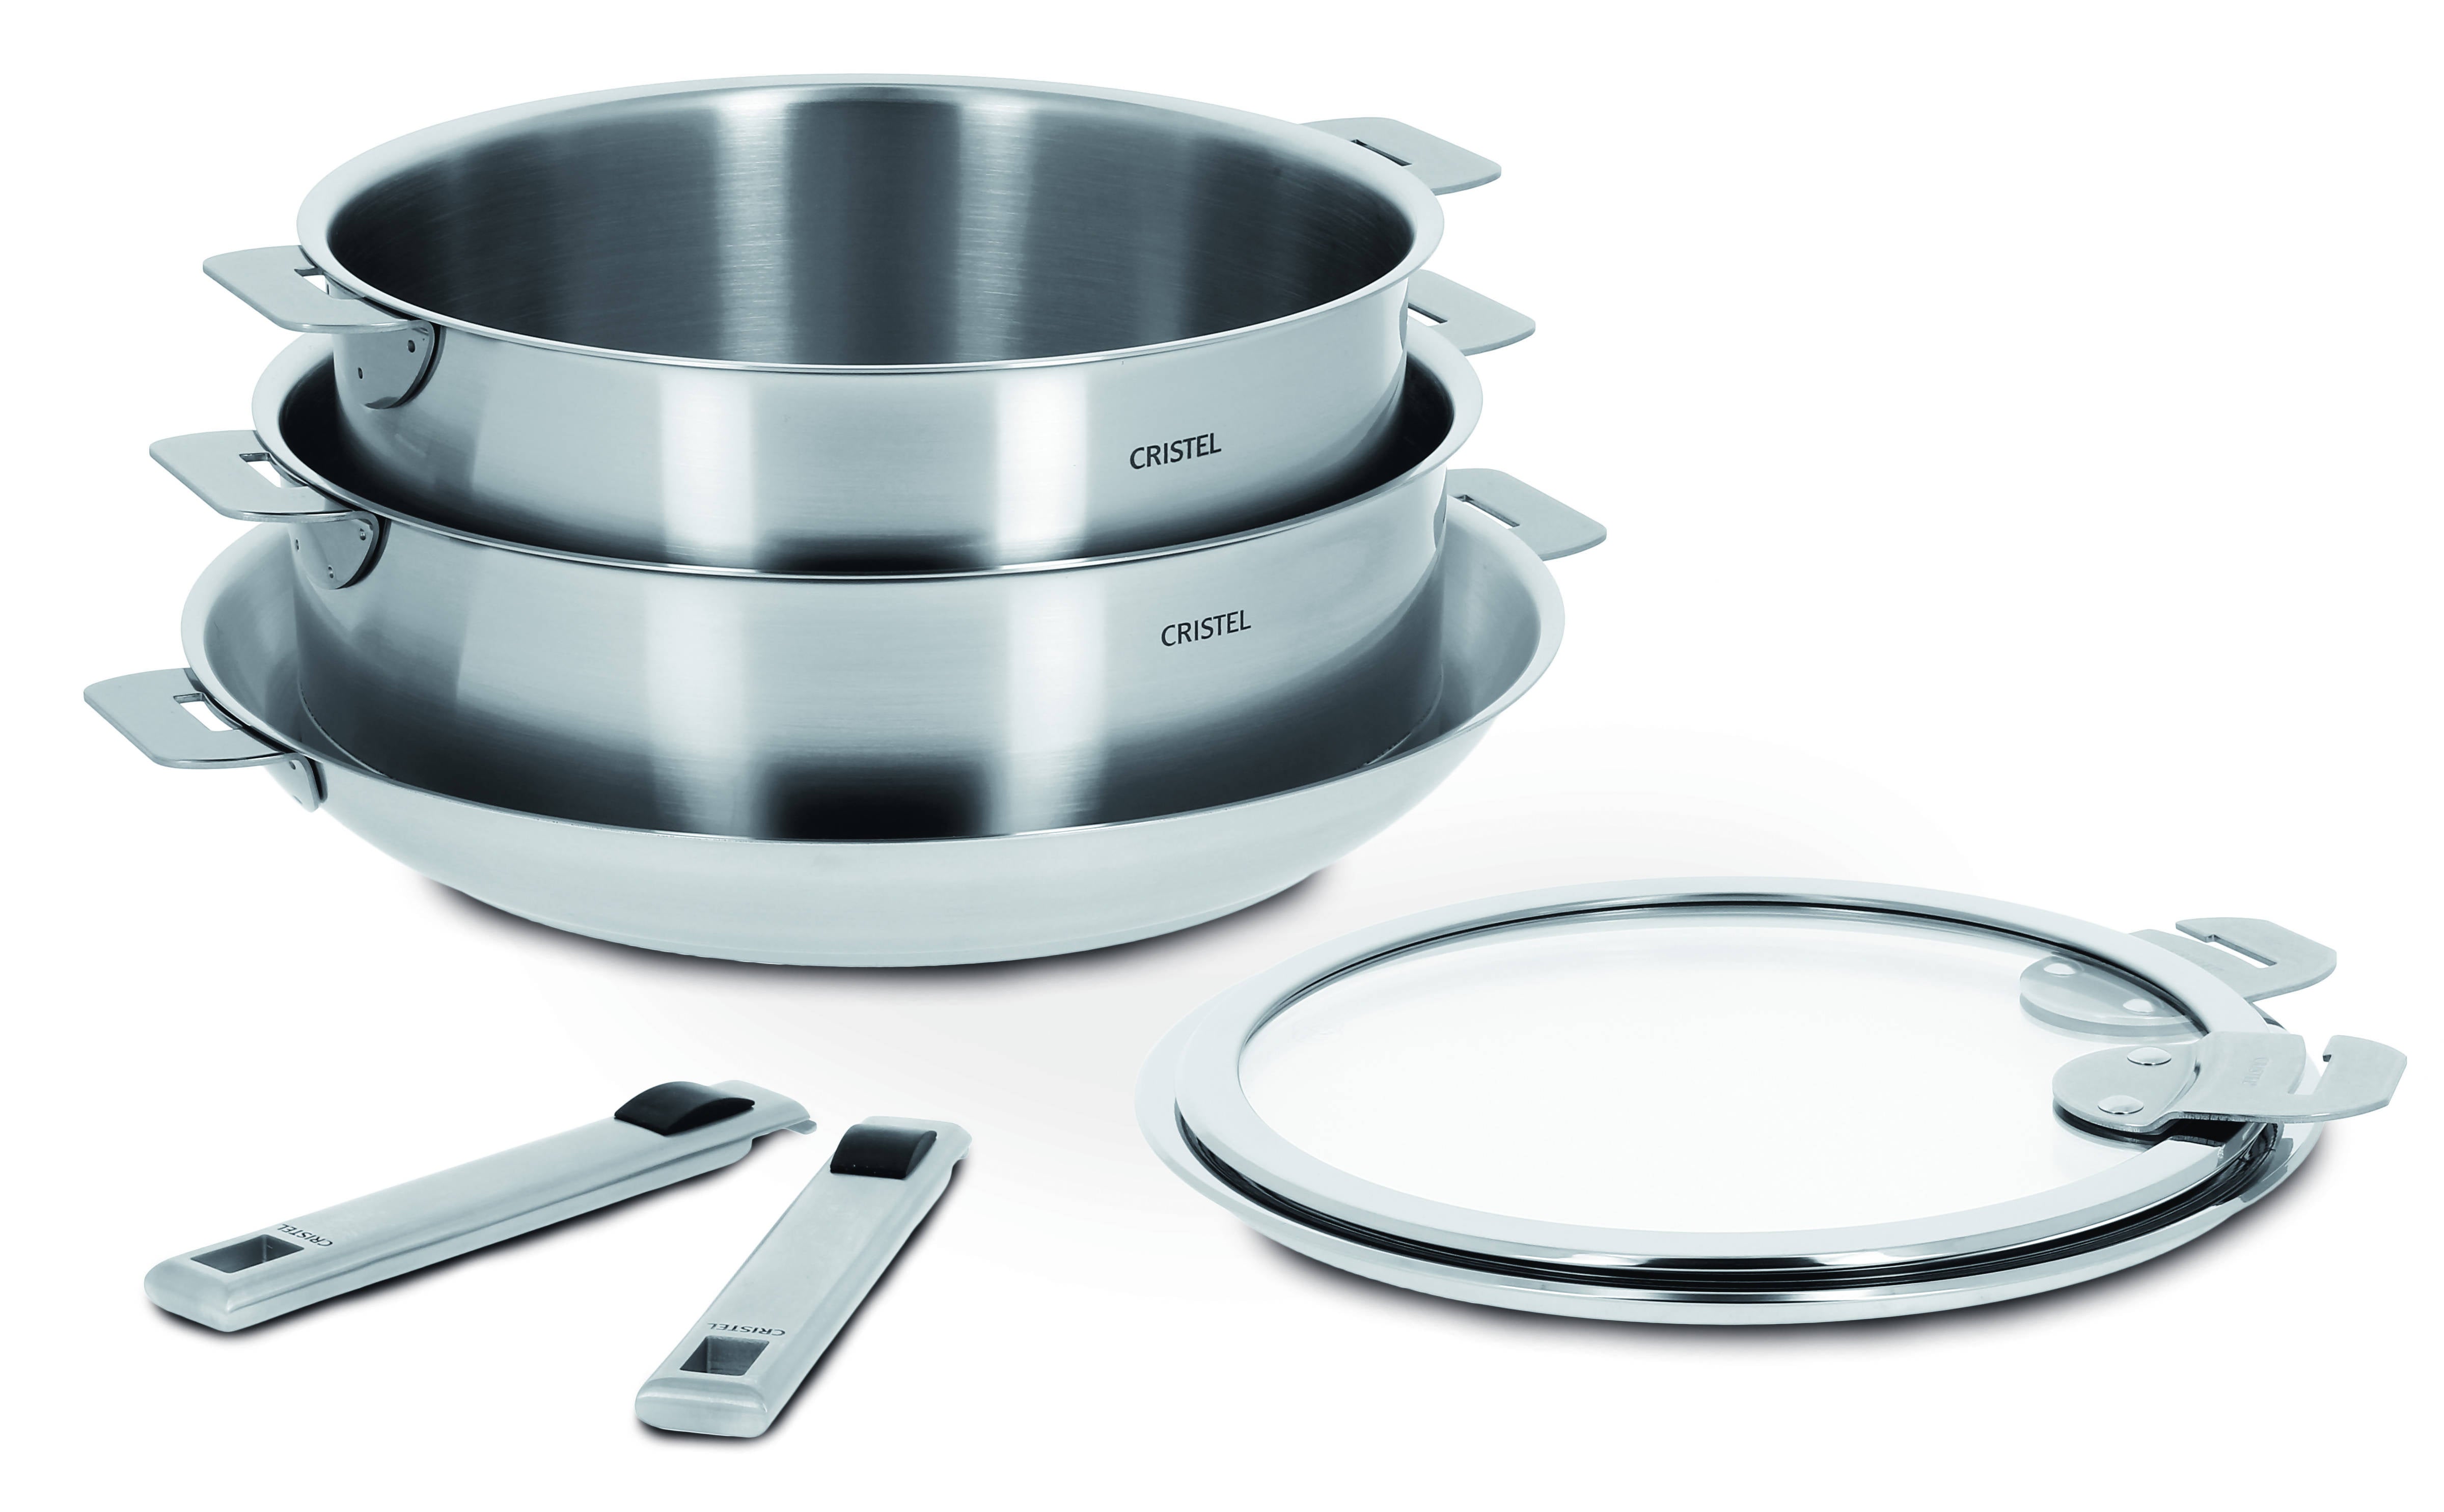 Stainless Steel stewpot - Castel'Pro by CRISTEL, Casserole dishes